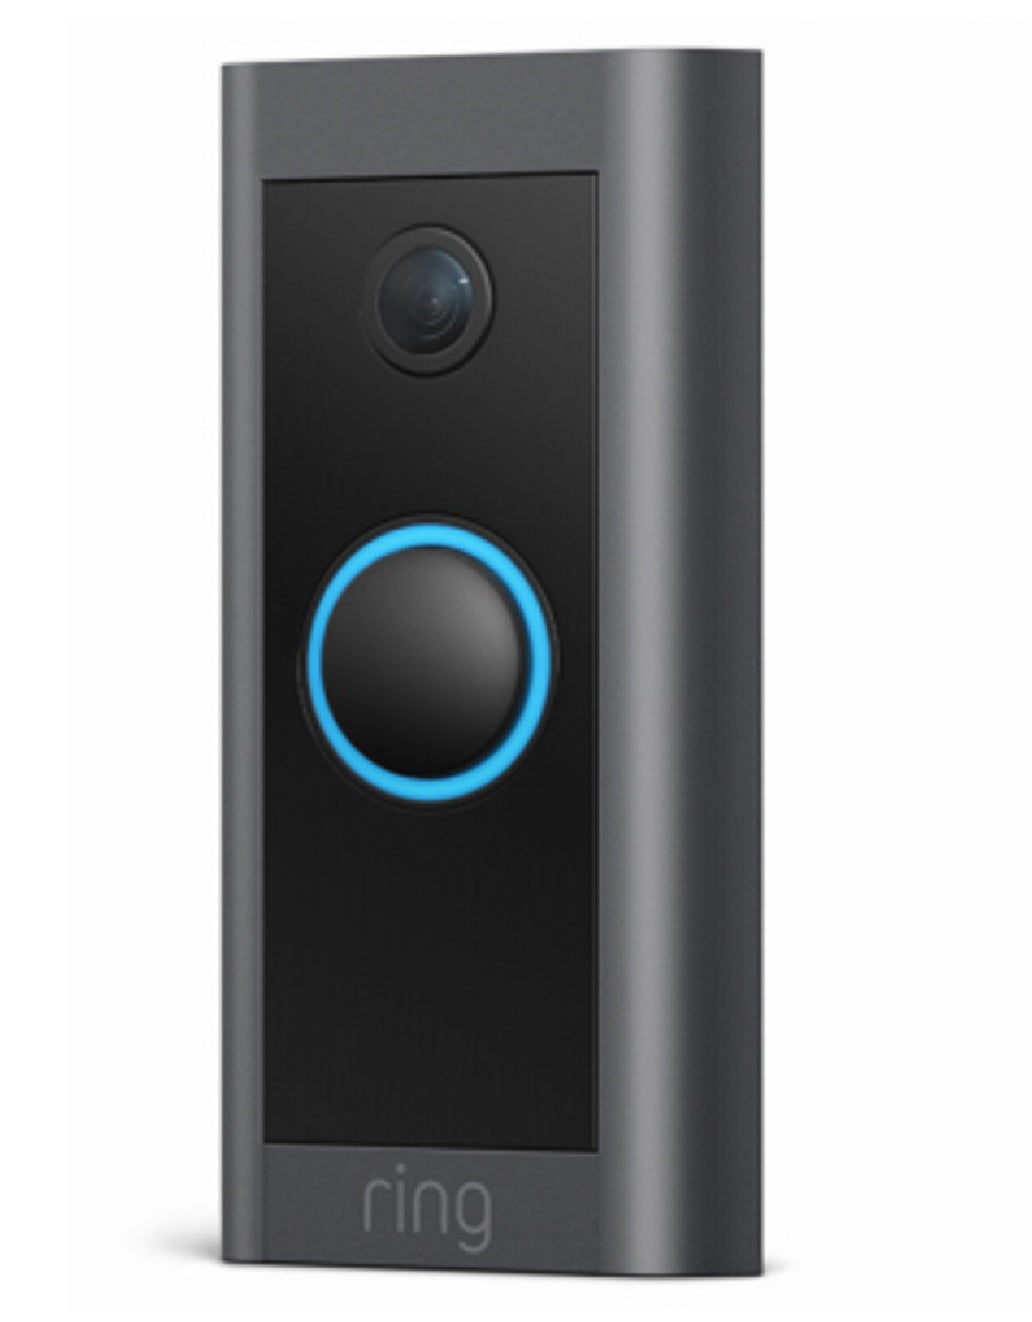 Ring B08CKHPP52 Wired Video Doorbell, 1080p HD Video